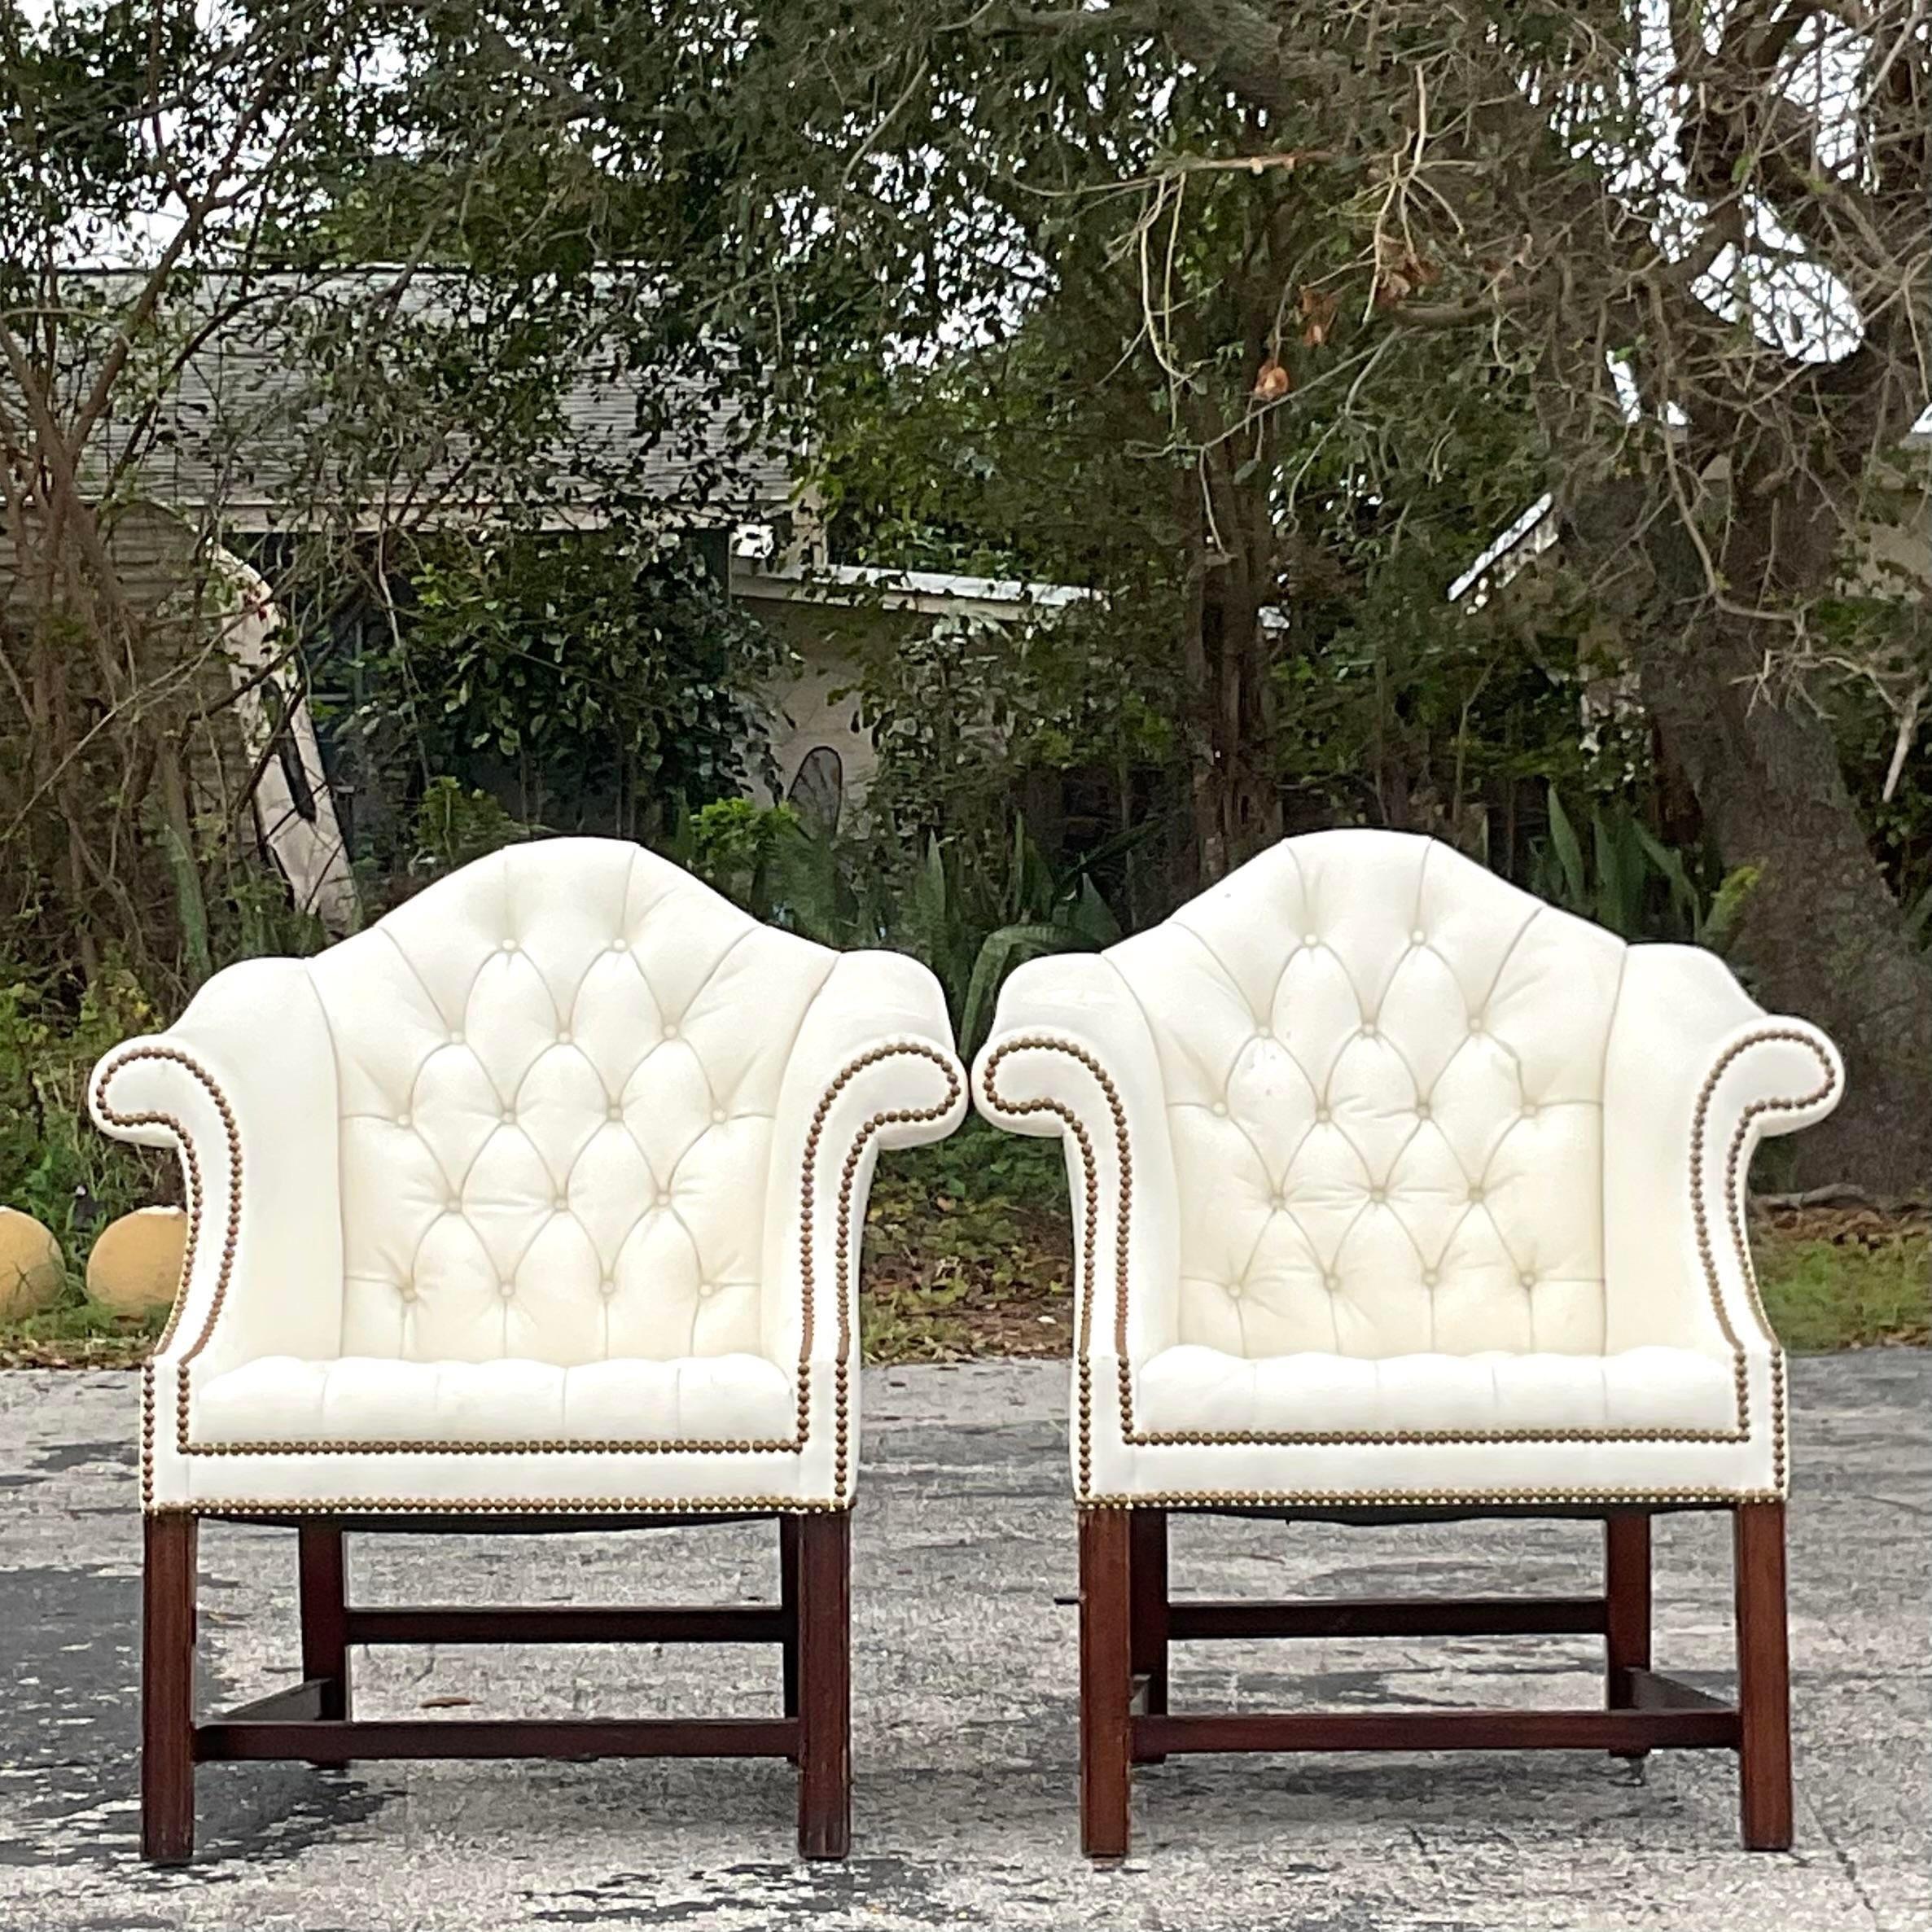 A fabulous pair of vintage traditional arm chairs. A chic camel back shape in a white tufted leather. Burnished brass nailhead trim. Acquired from a Palm Beach estate.